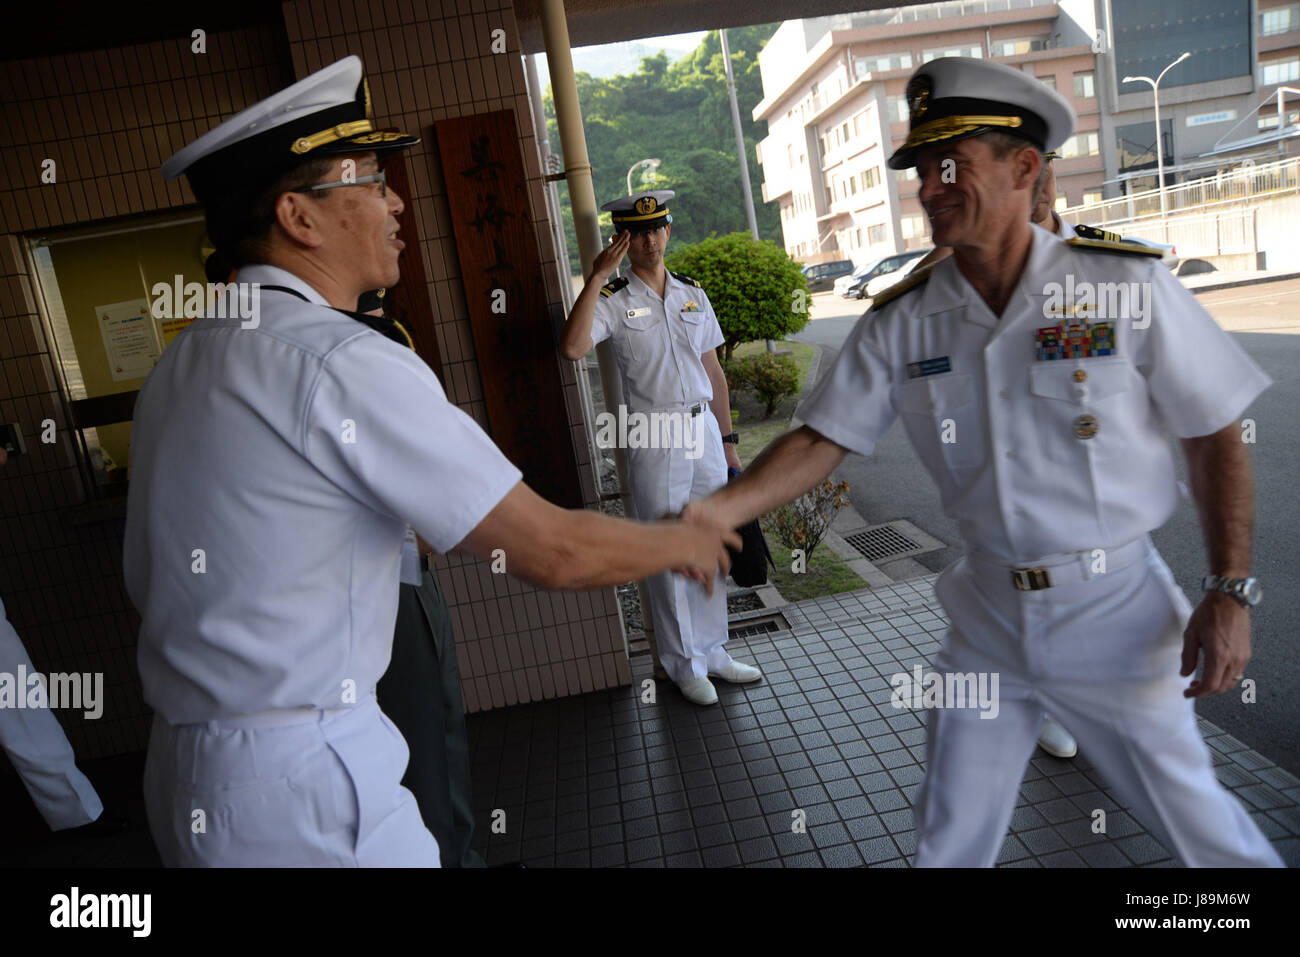 170522-N-GY309-016 KURE, Japan (June 22, 2017) – Rear Adm. Marc Dalton, commander, Amphibious Force 7th Fleet, greets Japan Maritime Self Defense Rear Adm. Hideki Yuasa, Mine Warfare Force Commander at the start of U.S.-Japan bilateral amphibious and mine warfare staff talks. The talks are being held to increase mutual understanding and lay out engagement opportunities in amphibious operations and mine warfare in order to increase combat readiness of both U.S. and Japan Self Defense forces. (U.S. Navy Photo by Lt. Adam Cole/Released) Stock Photo